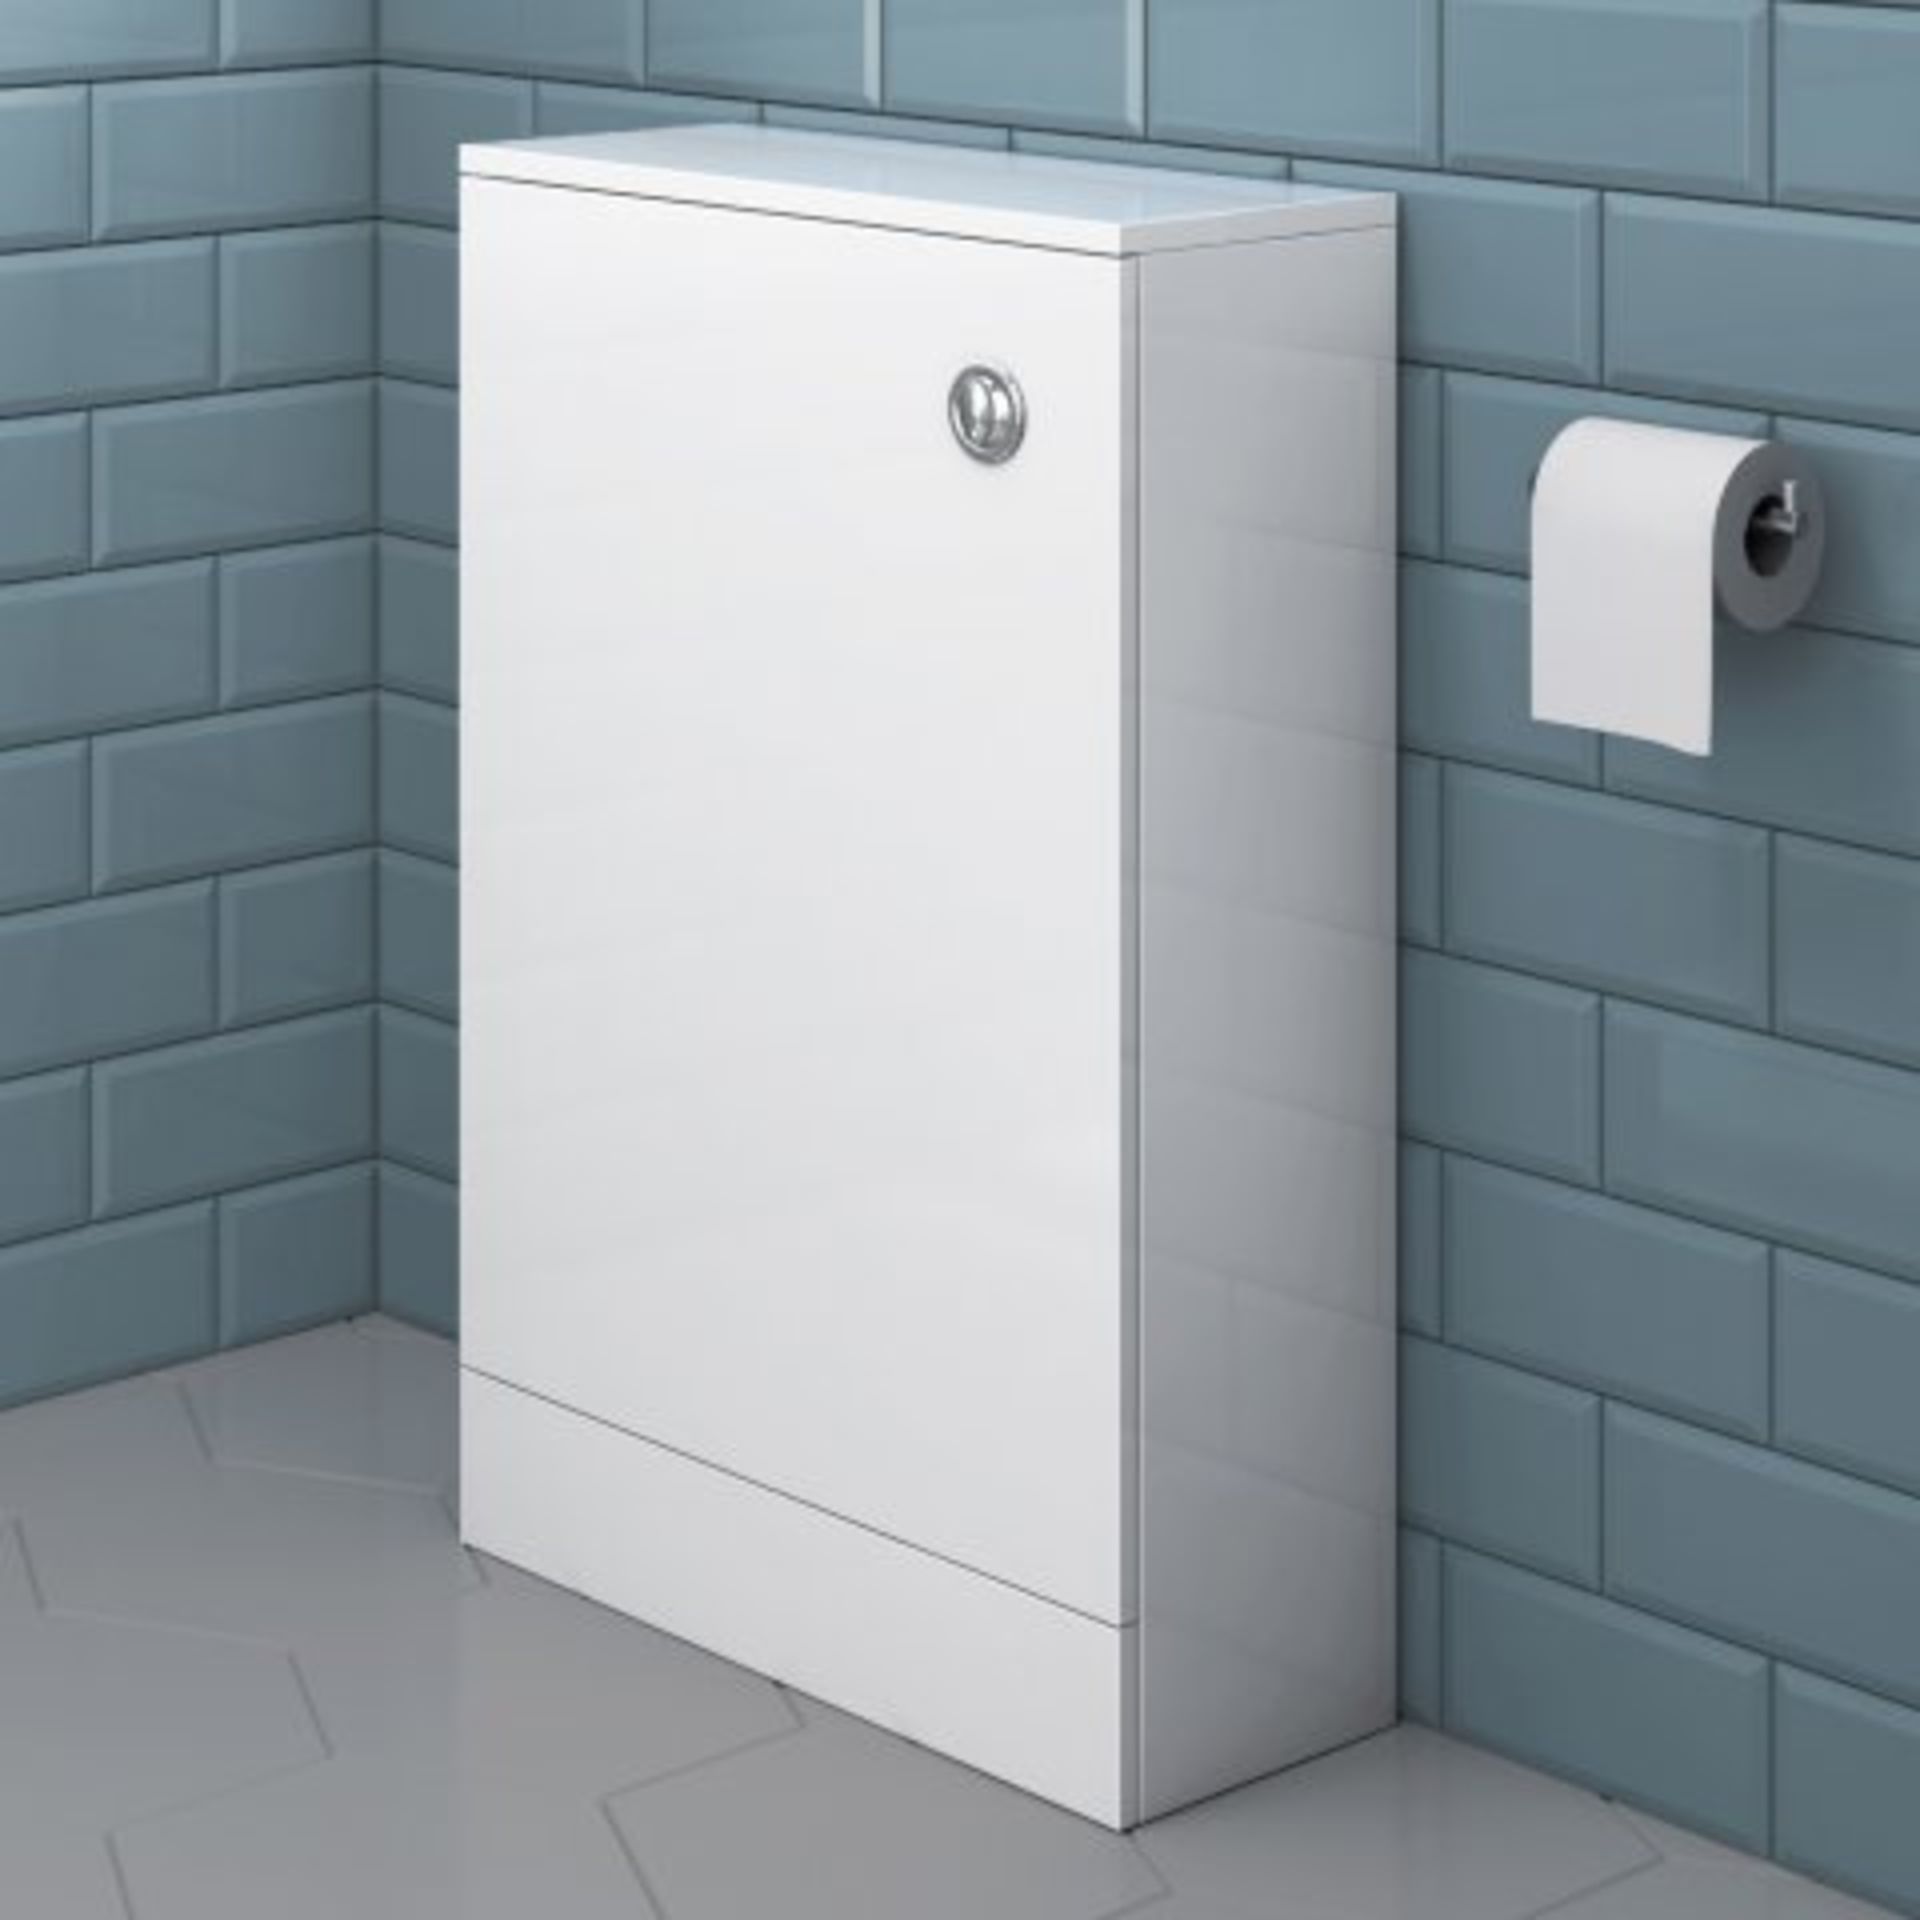 (I211) 500mm Slimline Gloss White Back To Wall Toilet Unit. RRP £199.99. This beautifully produced